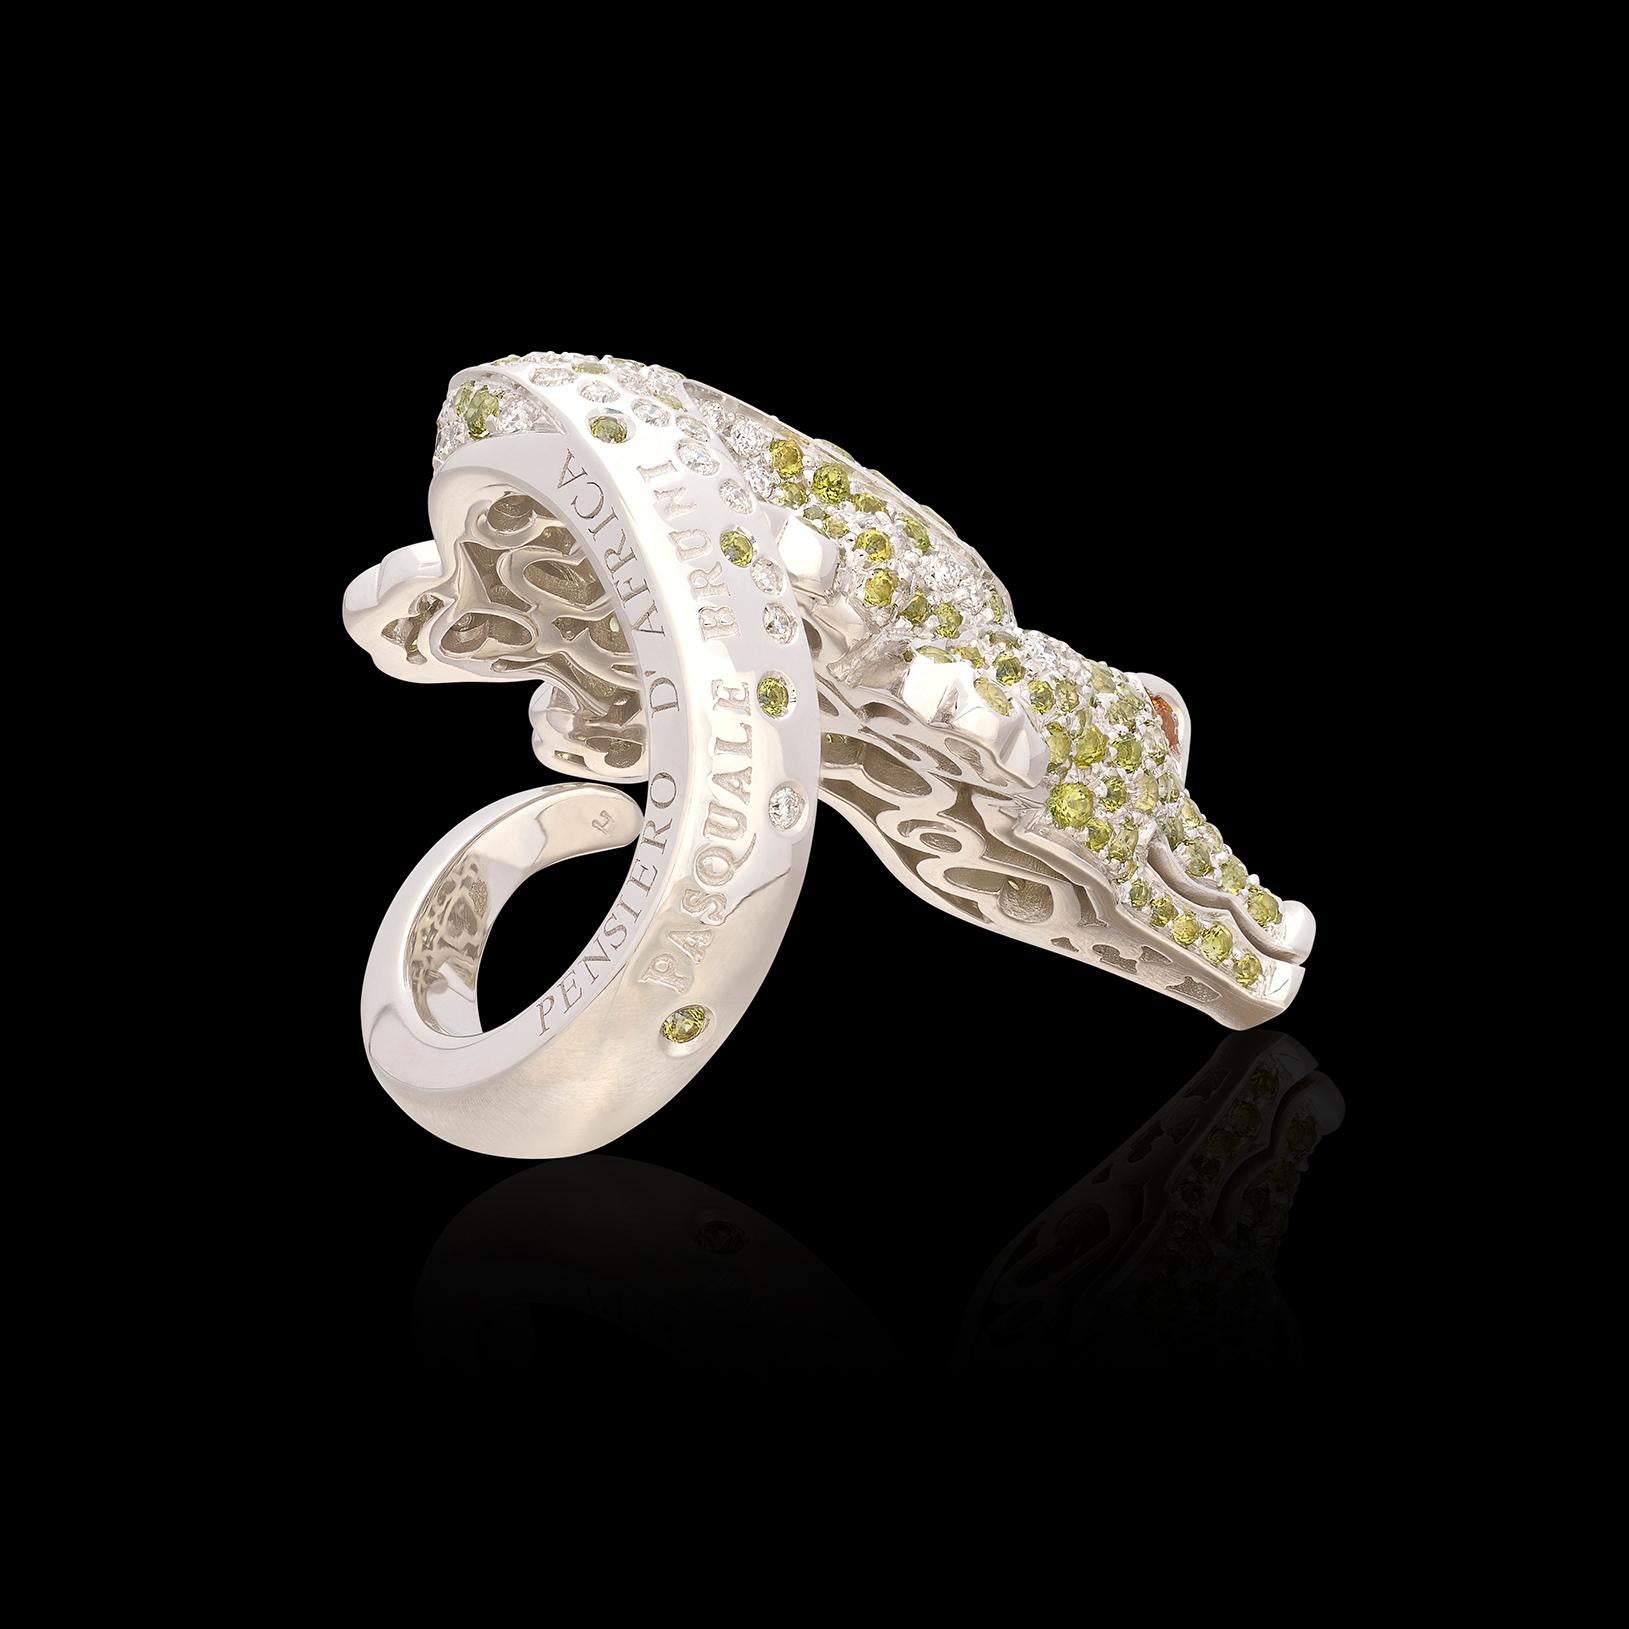 Sculptural Pasquale Bruni Gem-Set & 18k White Gold Crocodile Ring In New Condition For Sale In San Francisco, CA